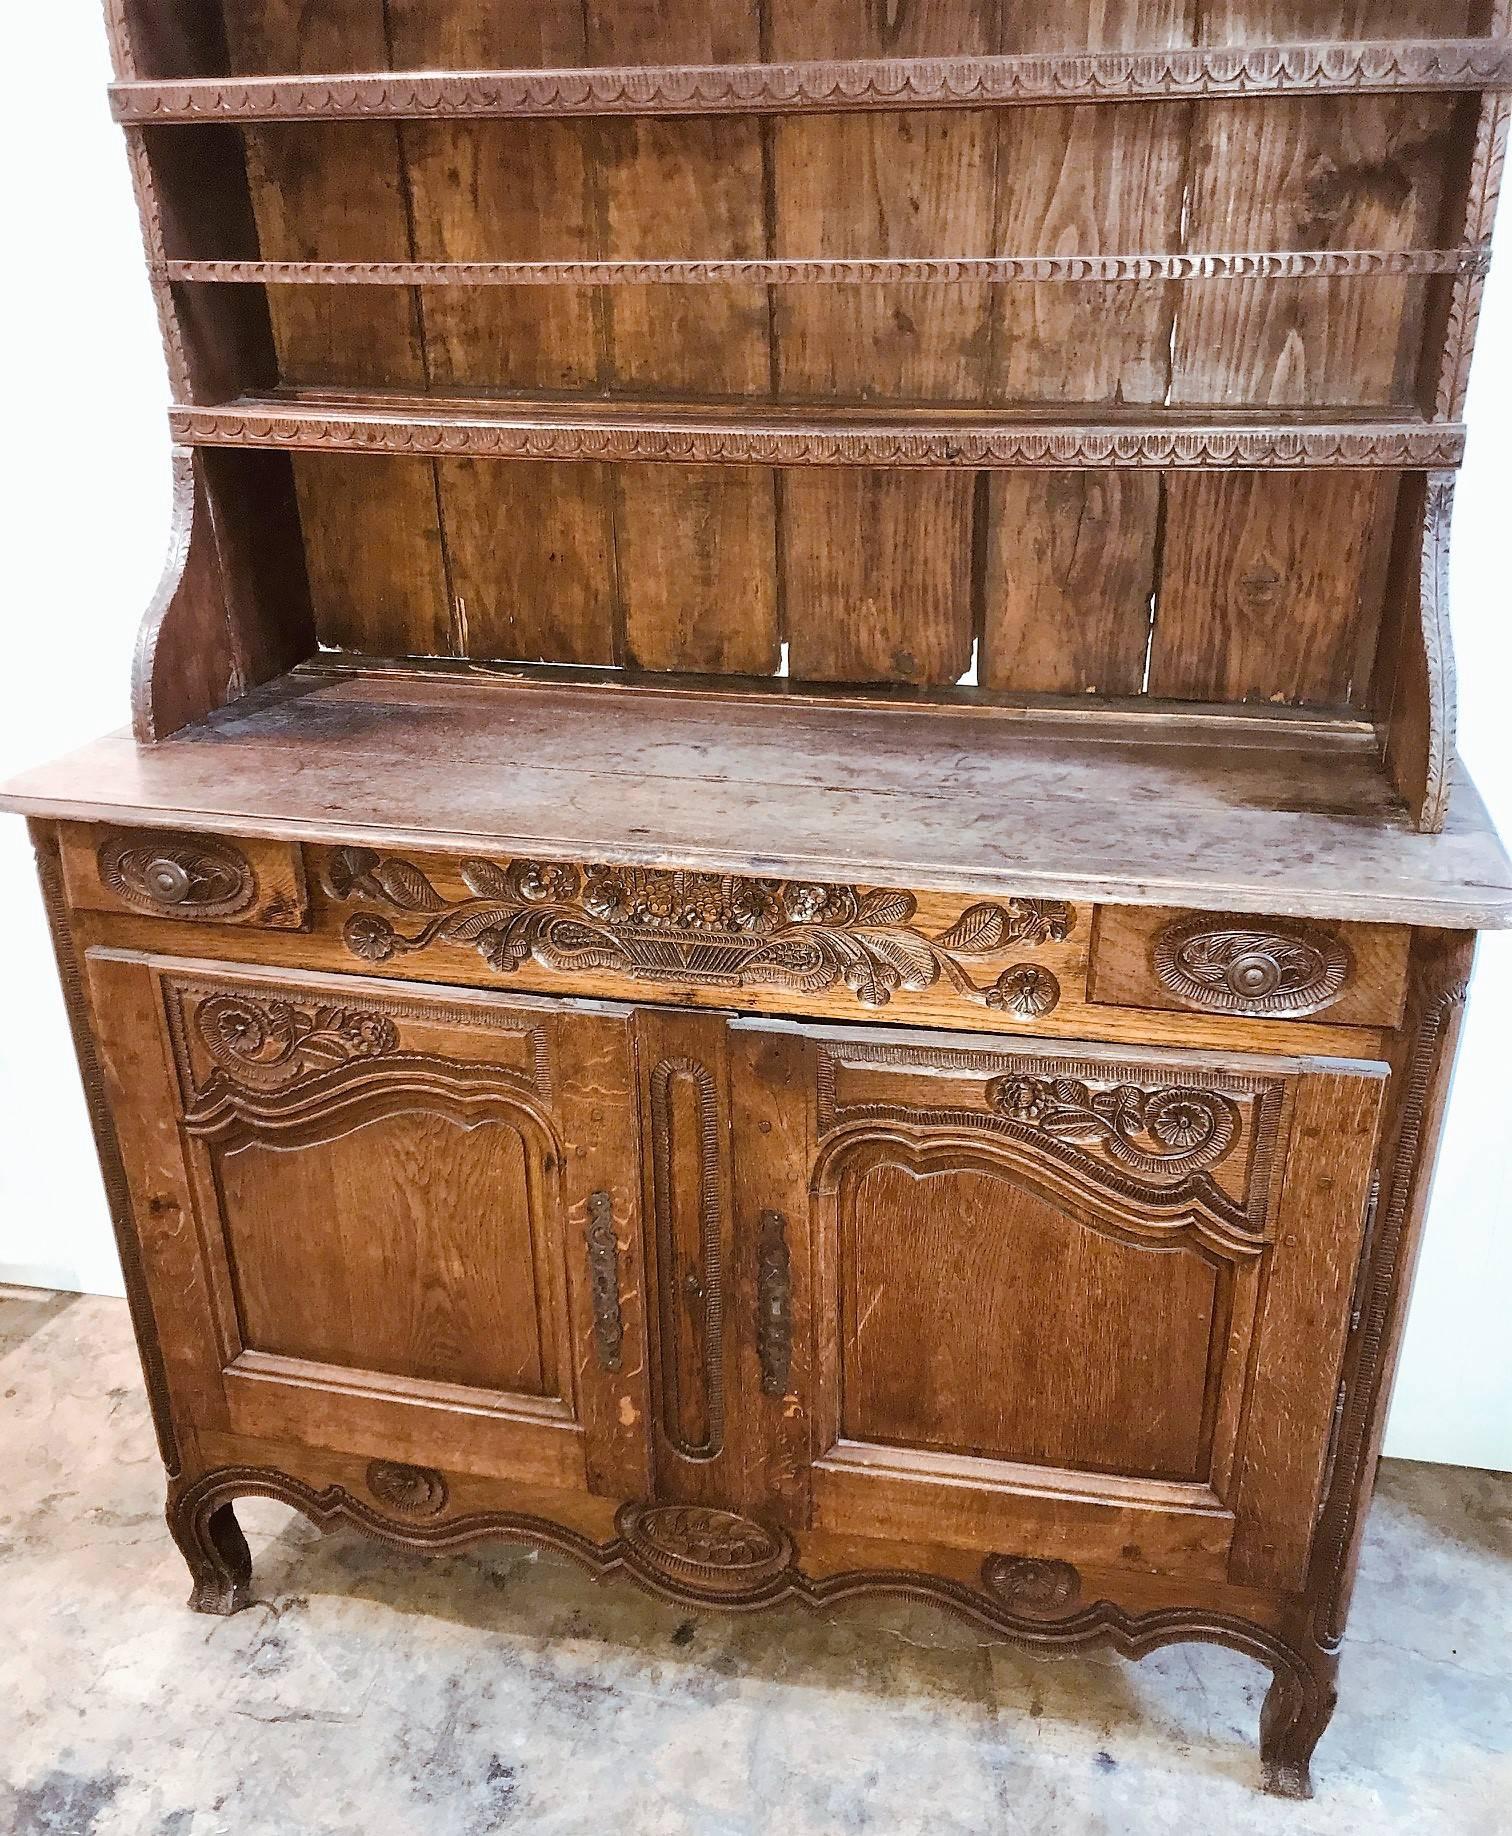 Exceptional 18th century French oak vaisselier, dresser, or buffet from Provence.

The top portion with a carved cornice atop open plate racks. The frieze with fine recessed carvings of scrolling flower vines and flower heads, and fitted with two